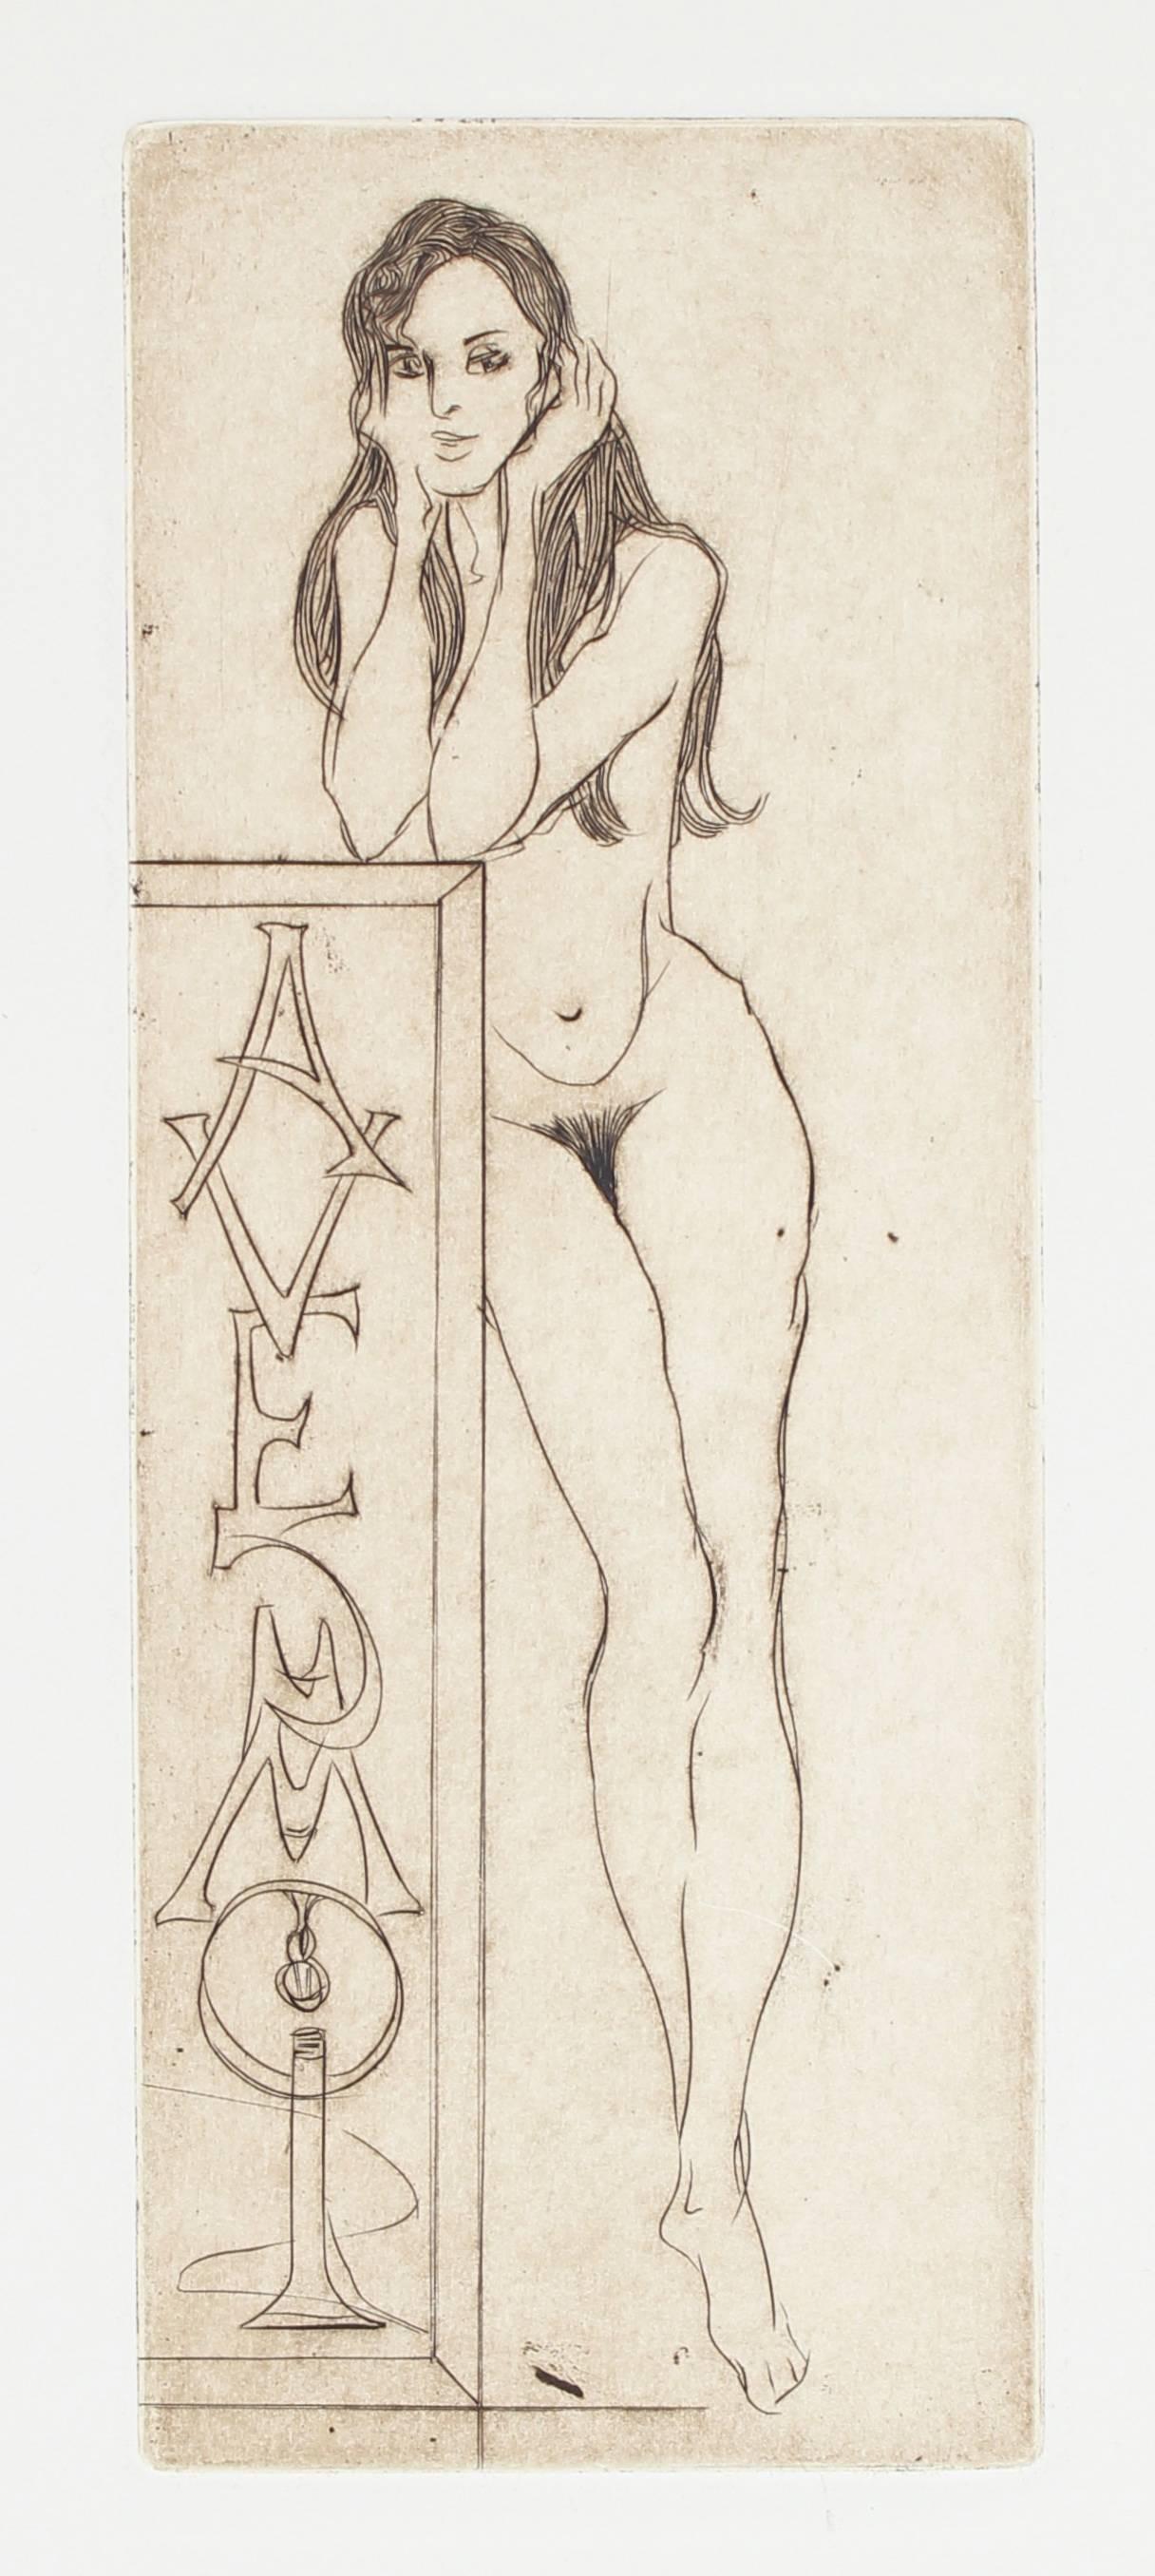 Howard Albert Nude Print - "Avec Moi" Female Nude, Etching on Paper, 1976